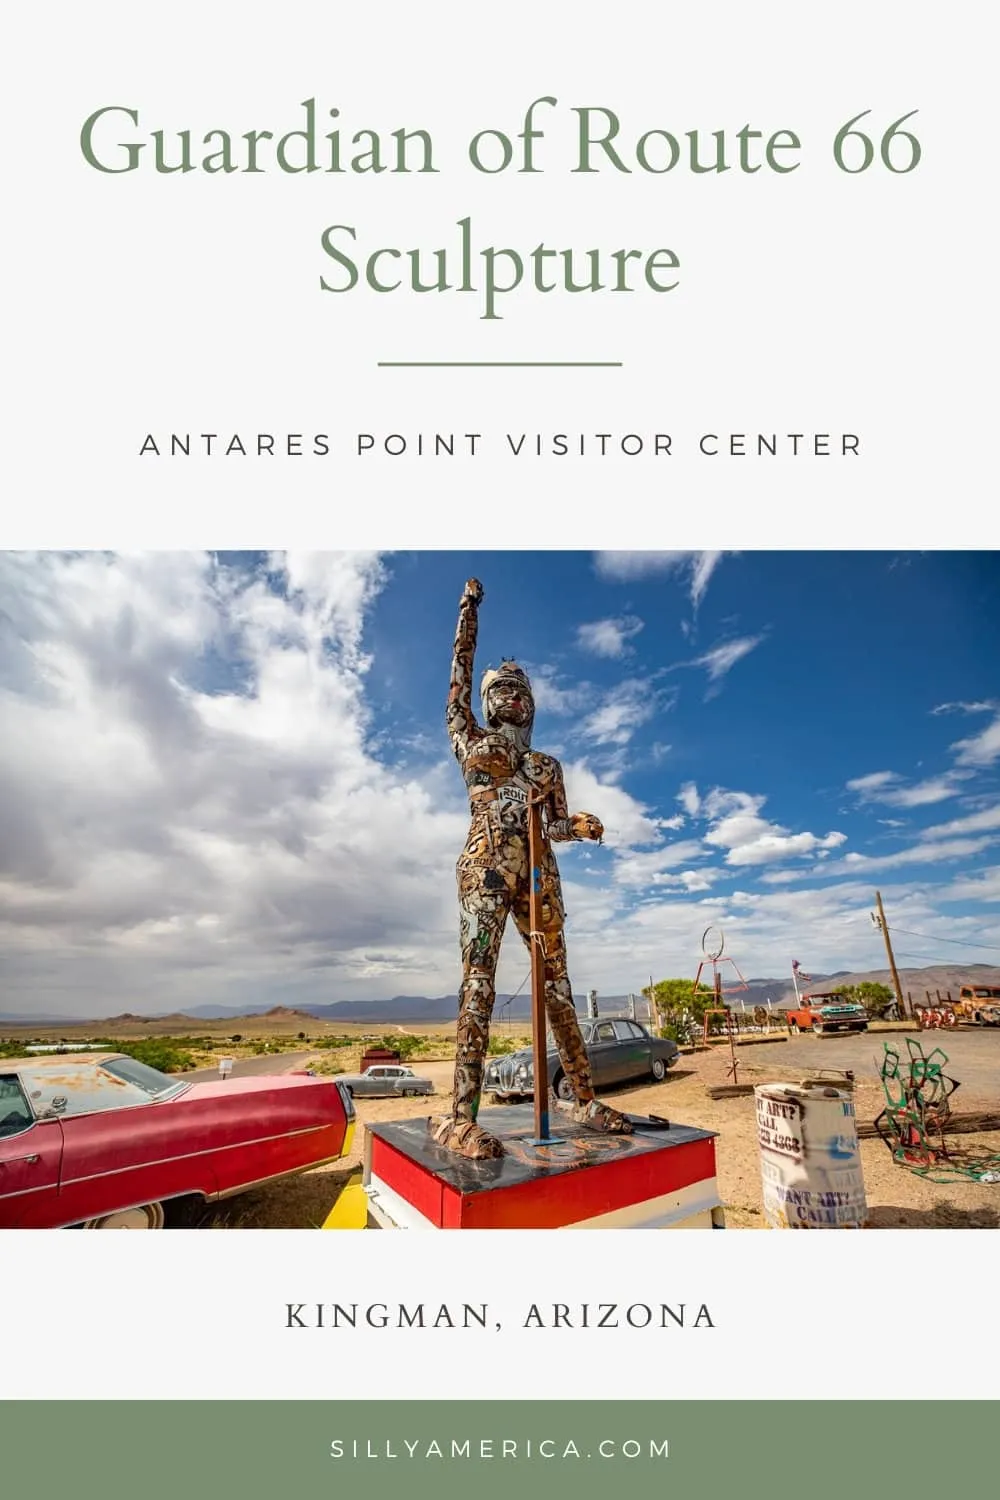 You might go to the Antares Point Visitor Center in Kingman, Arizona to see their most famous site: Giganticus Headicus. But there is more to see than just that. One of the other big attractions at this Route 66 gift shop is the Guardian of Route 66 Sculpture. The Guardian of Route 66 sculpture was made by artist Gregg Arnold. The statue depicts a woman waving an American flag and carrying a big Route 66 shield. #Route66 #Route66RoadTrip #RoadsideAttraction #Arizona #ArizonaRoadsideAttraction